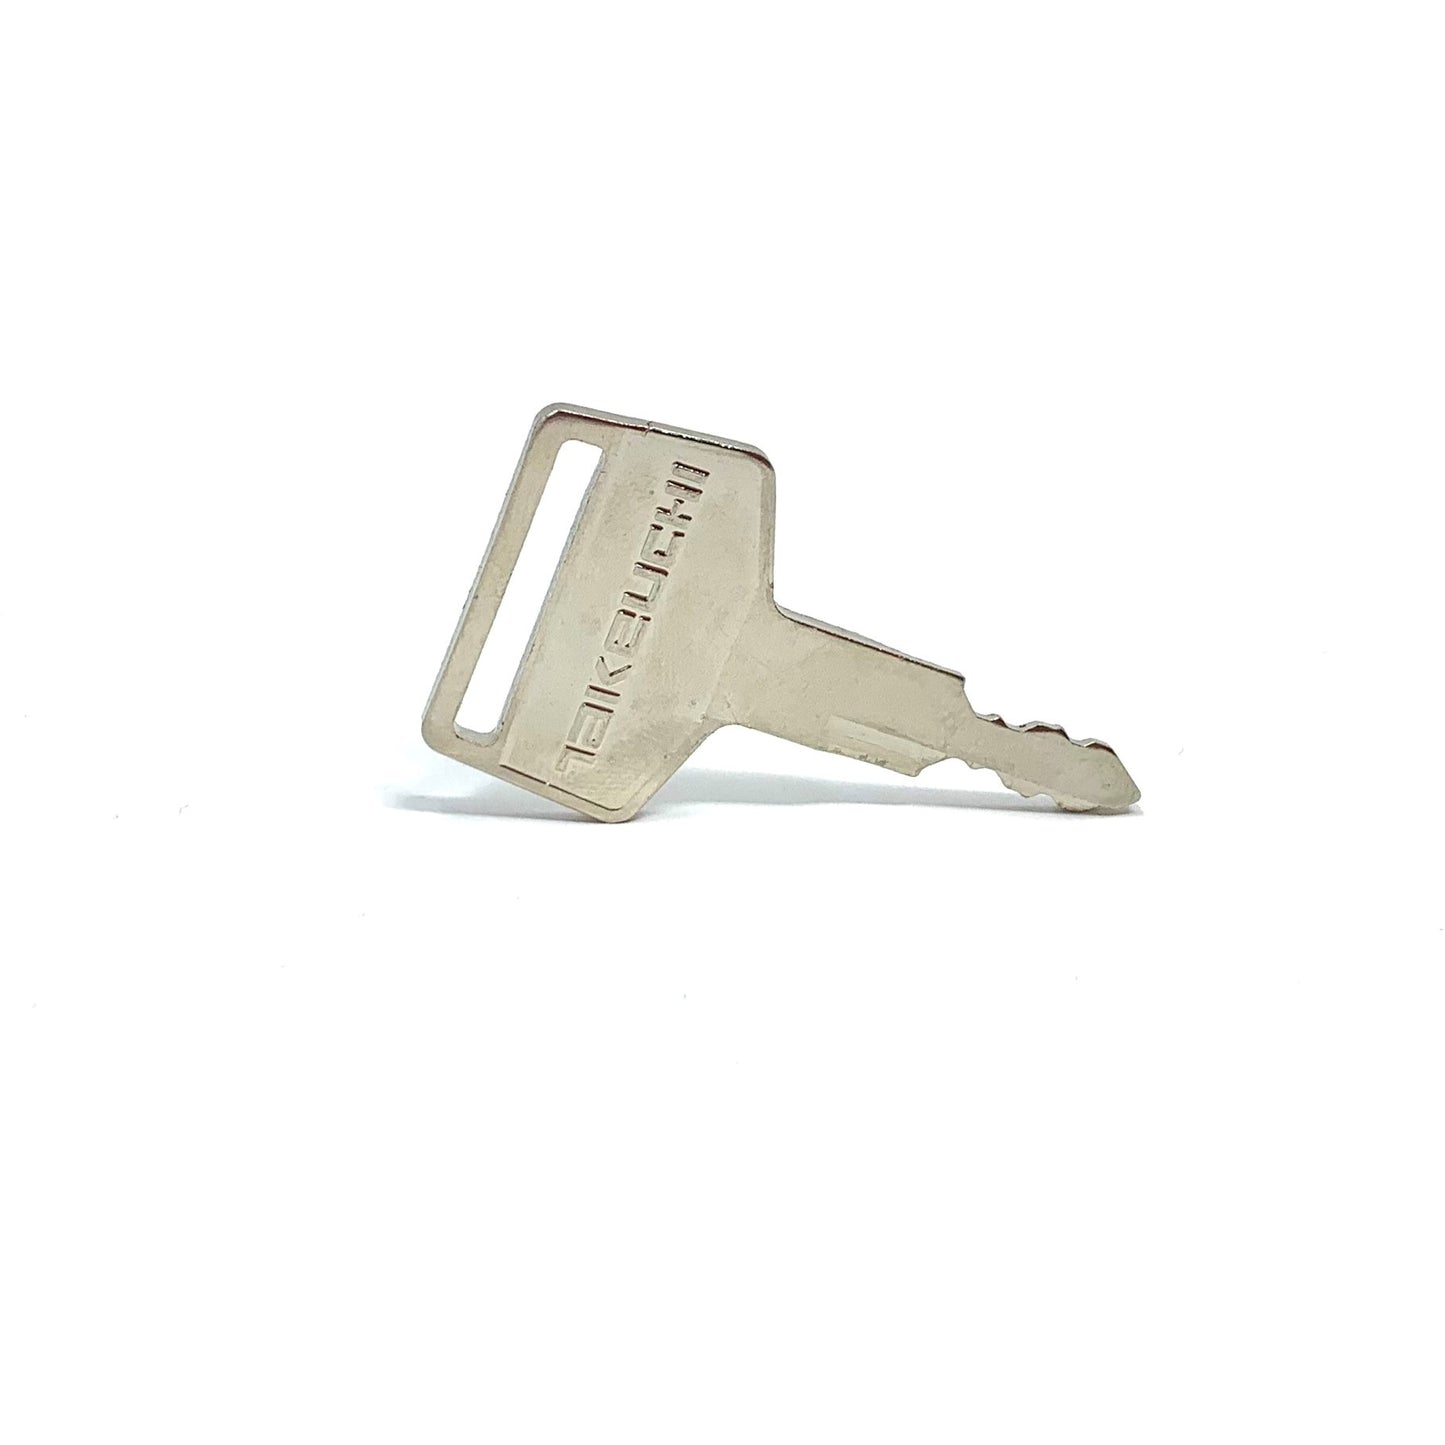 Takeuchi Key (Old Plain Silver Style) - Part Number: 17001-00019